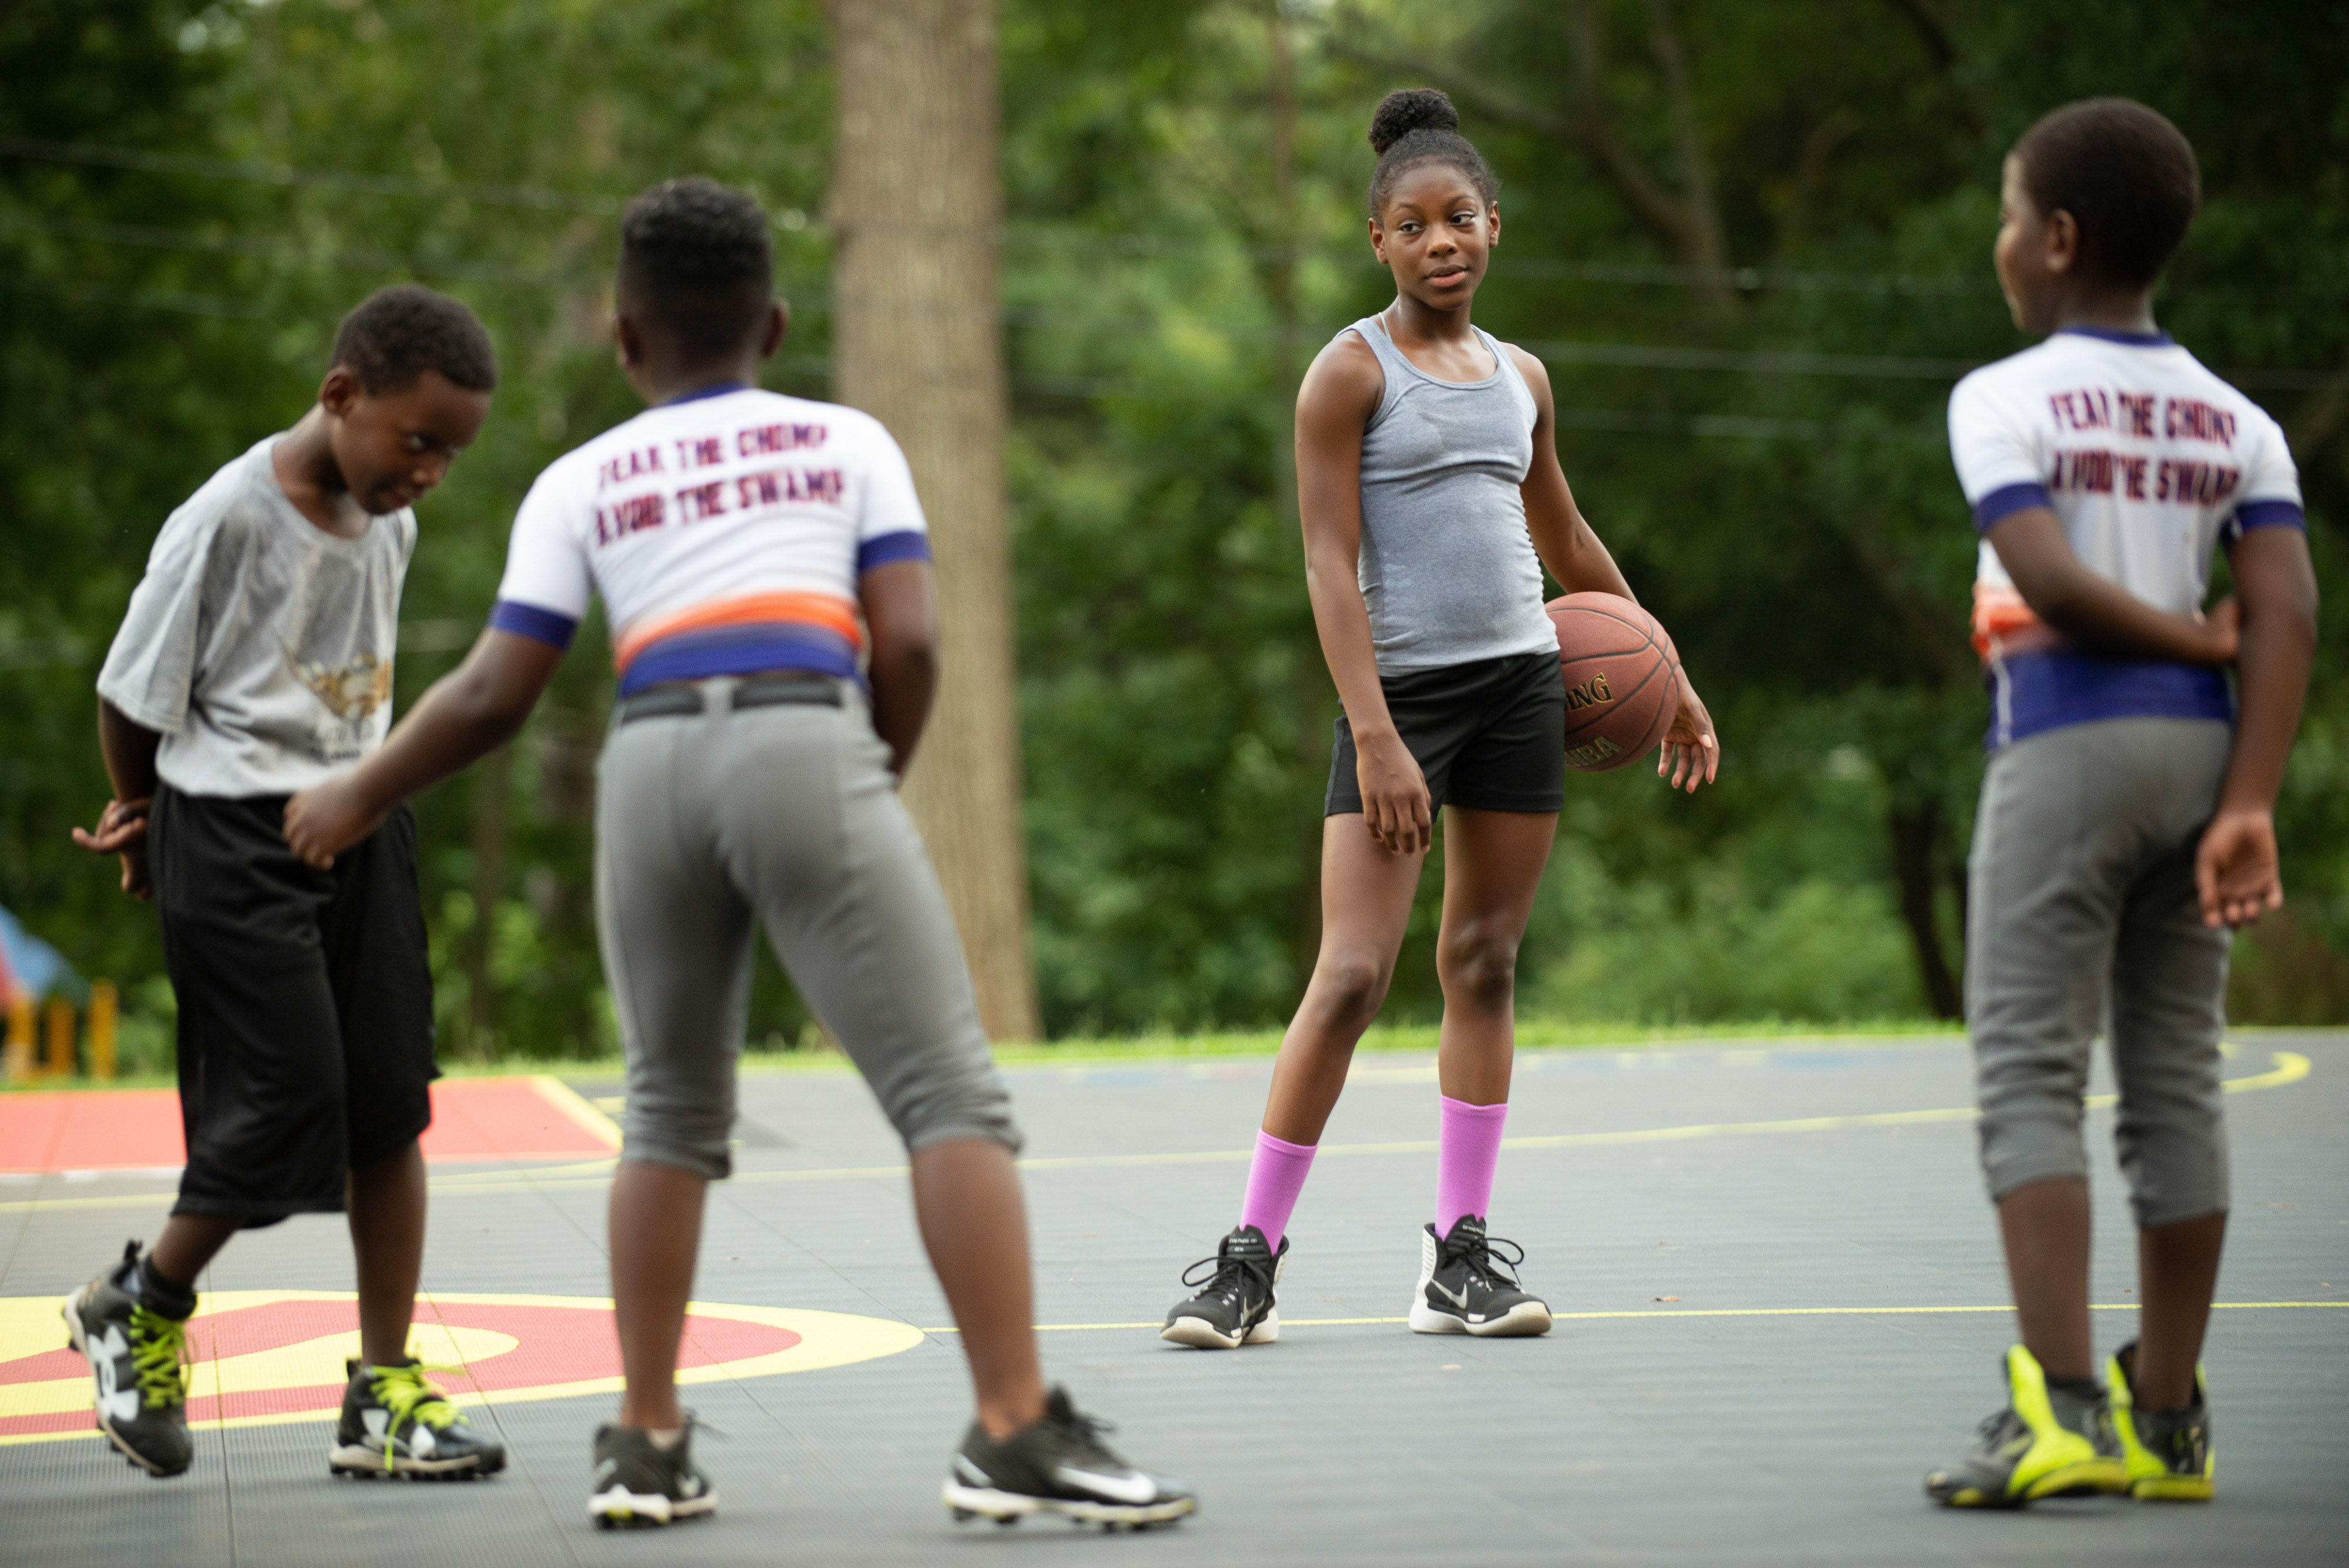 A group of young people stand on a basketball court.